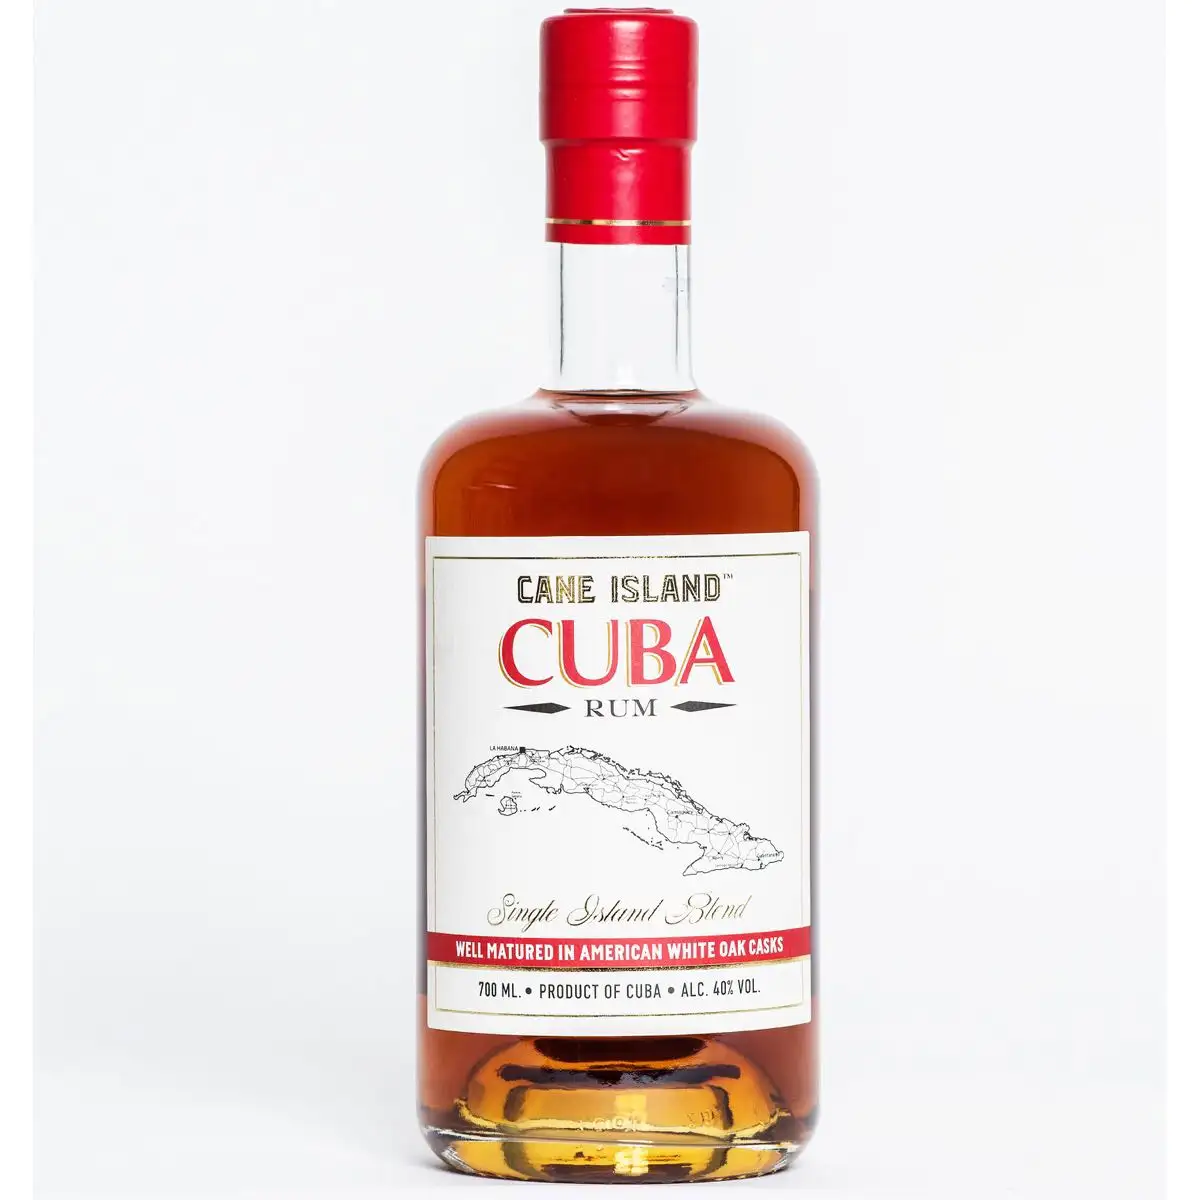 Image of the front of the bottle of the rum Cuba - Single Island Blend